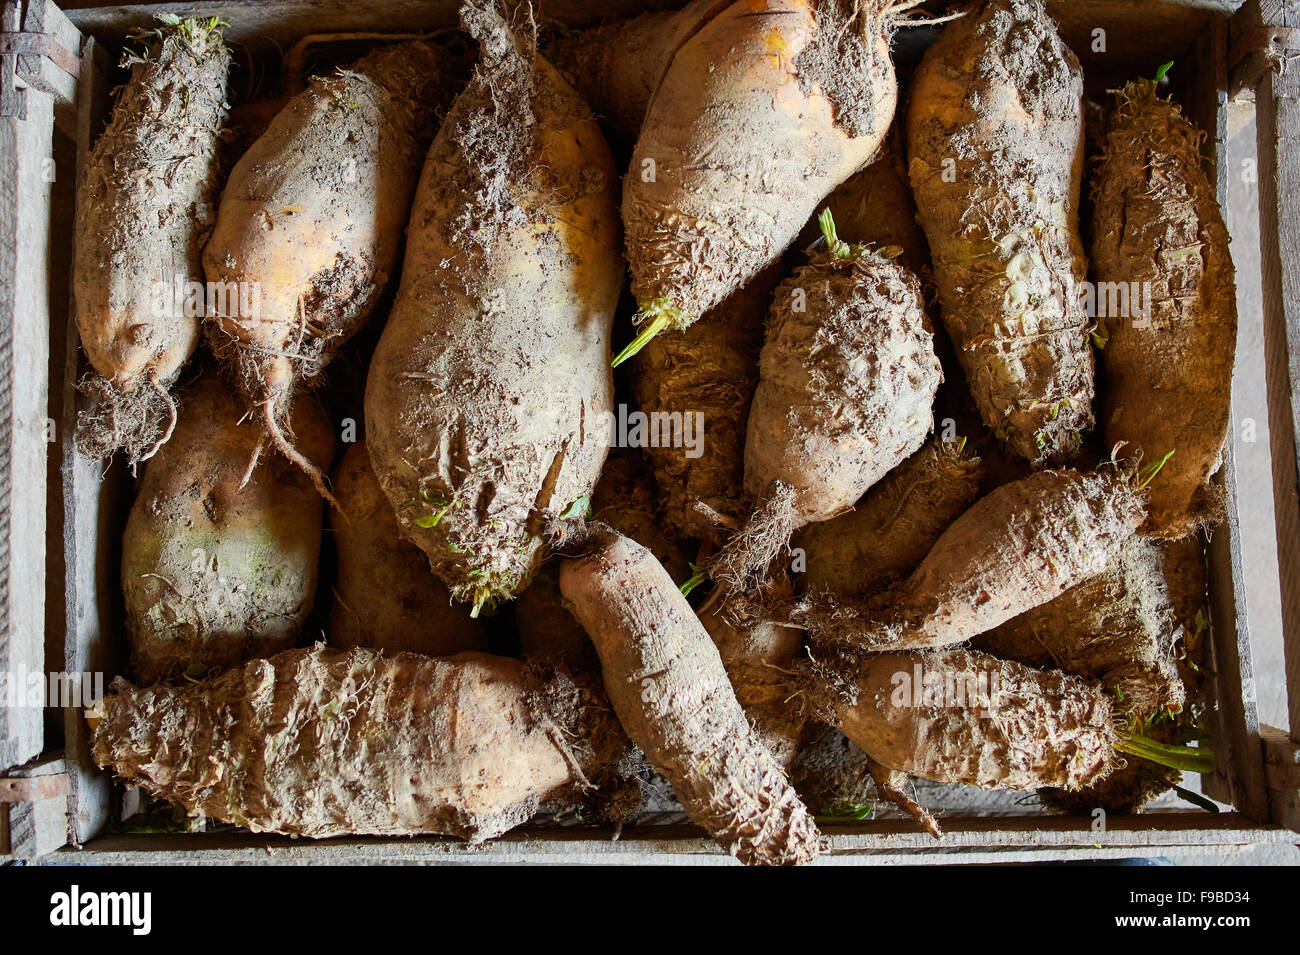 A crate of white radish freshly picked, with dirt on them Stock Photo